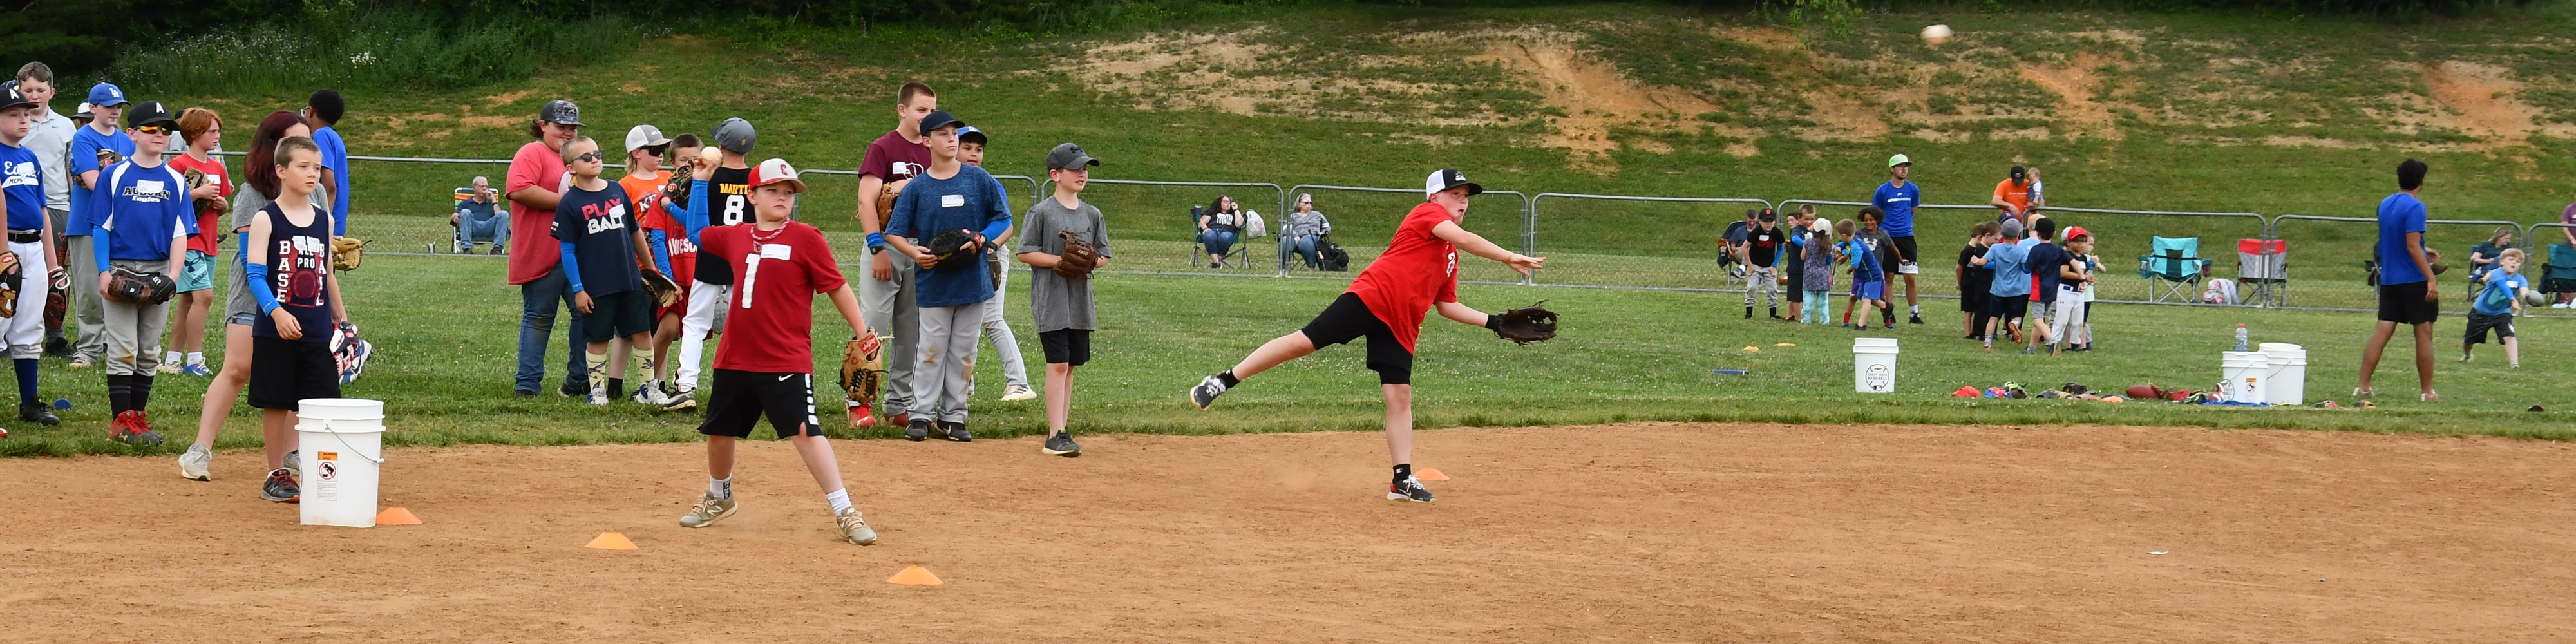 Children participate in a baseball clinic at Motor Mile Park.